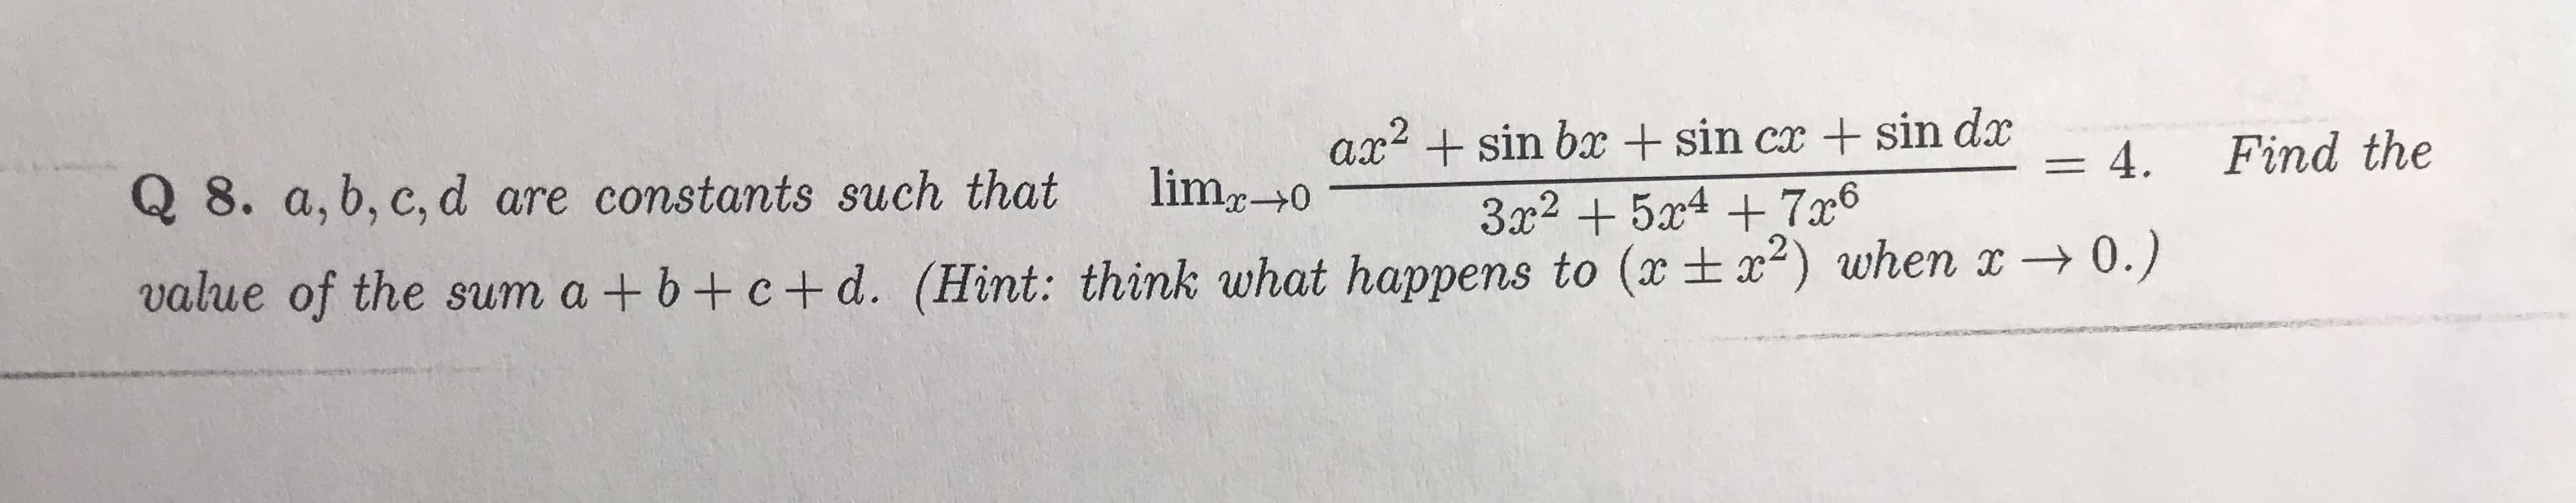 sin ba +sin cxsin dx
= 4
ar
lim0
Find the
Q 8. a, b, c, d are constants such that
3a2547x6
0.)
value of the sum a + b+ c+ d. (Hint: think what happens to (xtx2) when x
